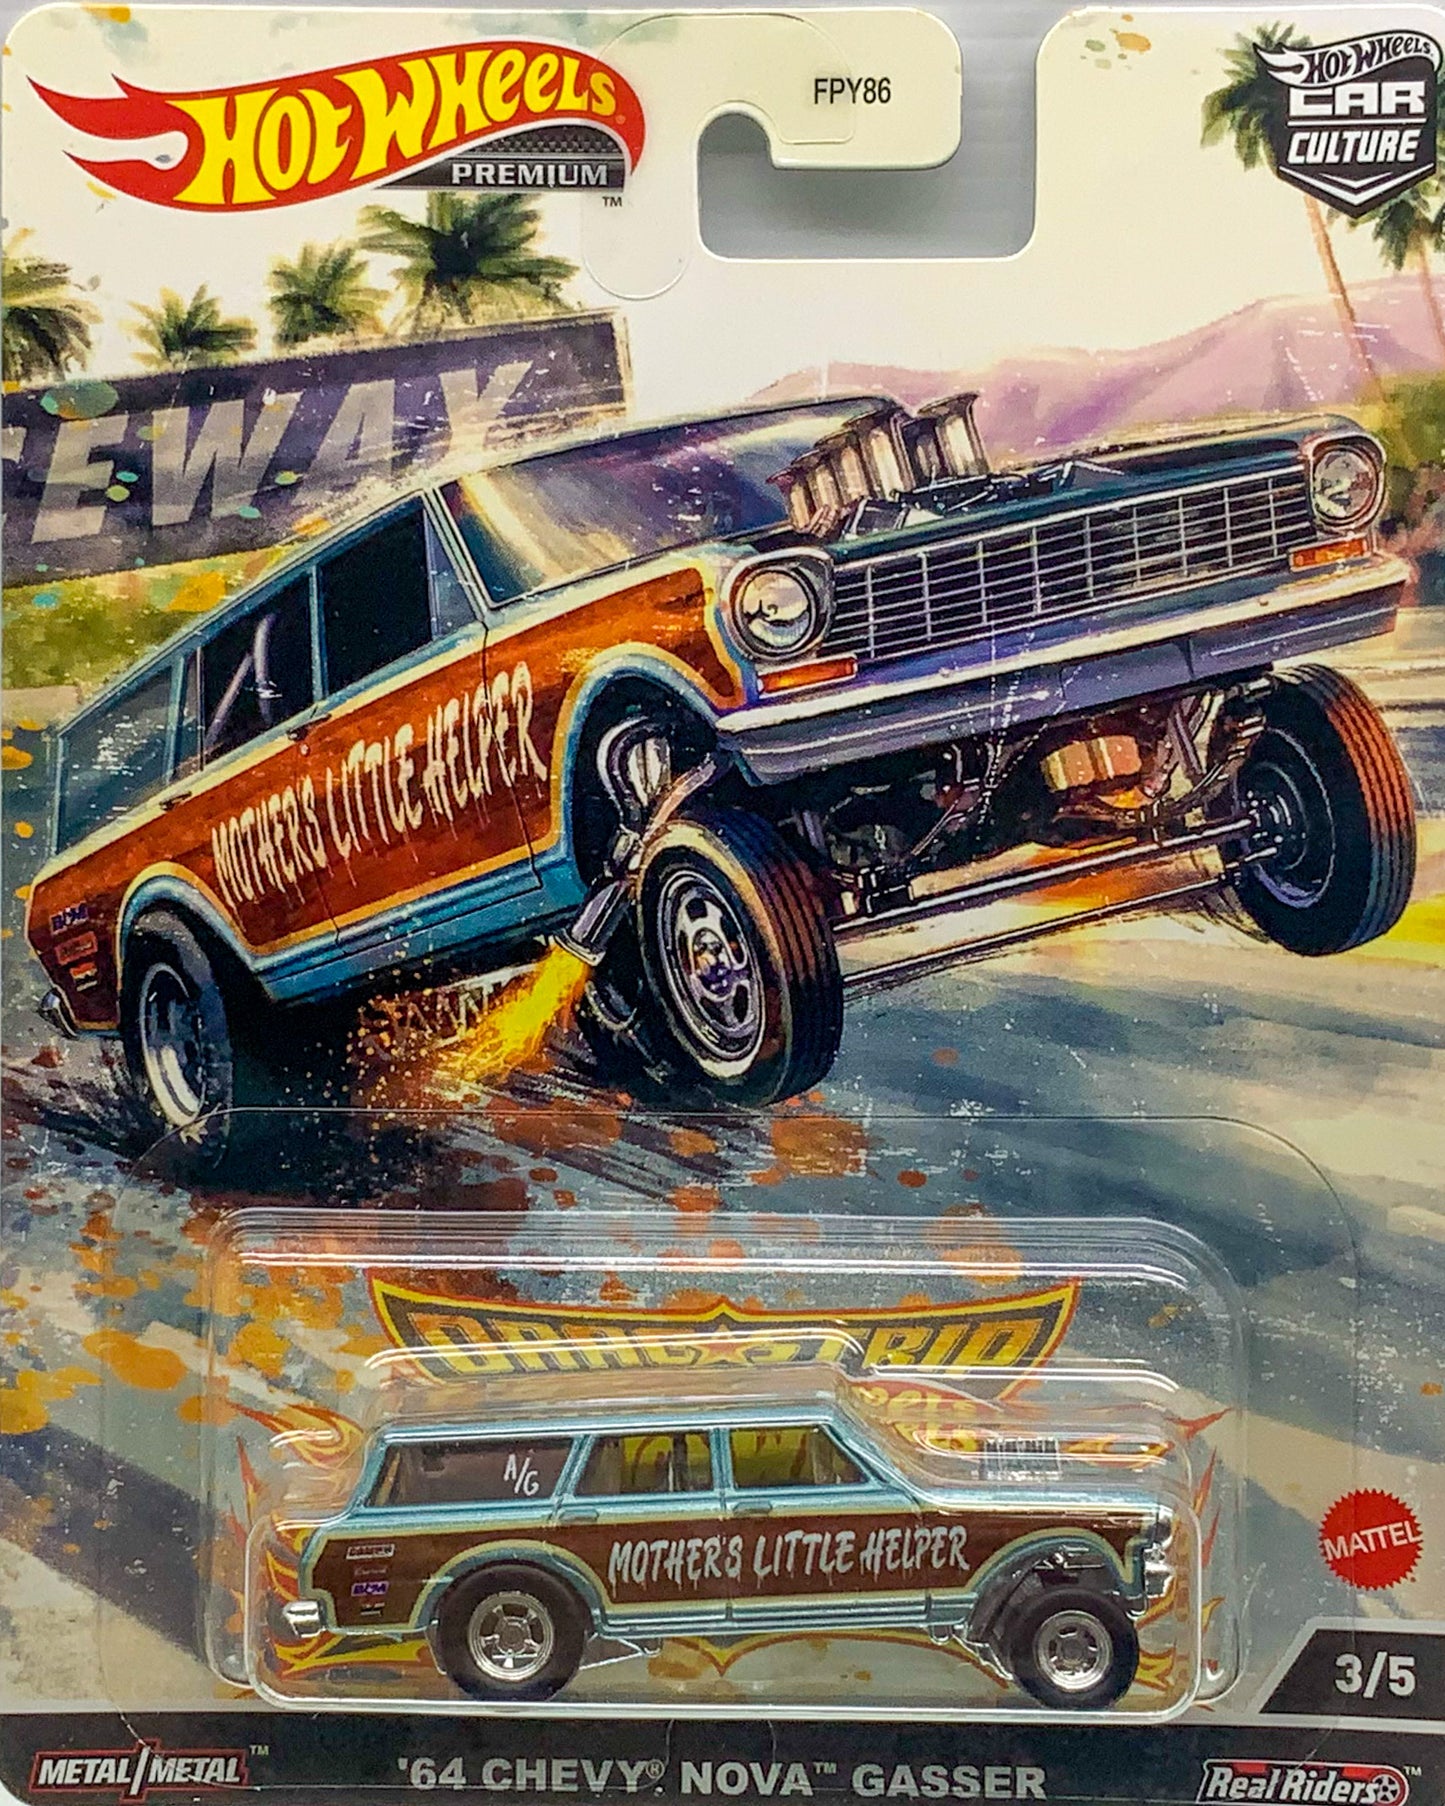 Buy at Tatoyshop.com Hot Wheels Car Culture  2022 Hot Wheels Car Culture Dragstrip Demons Series '64 Chevy Nova Wagon Gasser 3/5  Number 1 from the set of 5 Dragstrip Demons Series Premium Real Riders Metal Mattel FPY86 Shop Now   Mr Toys Kmart Target Big W  International and Domestic delivery by Auspost 